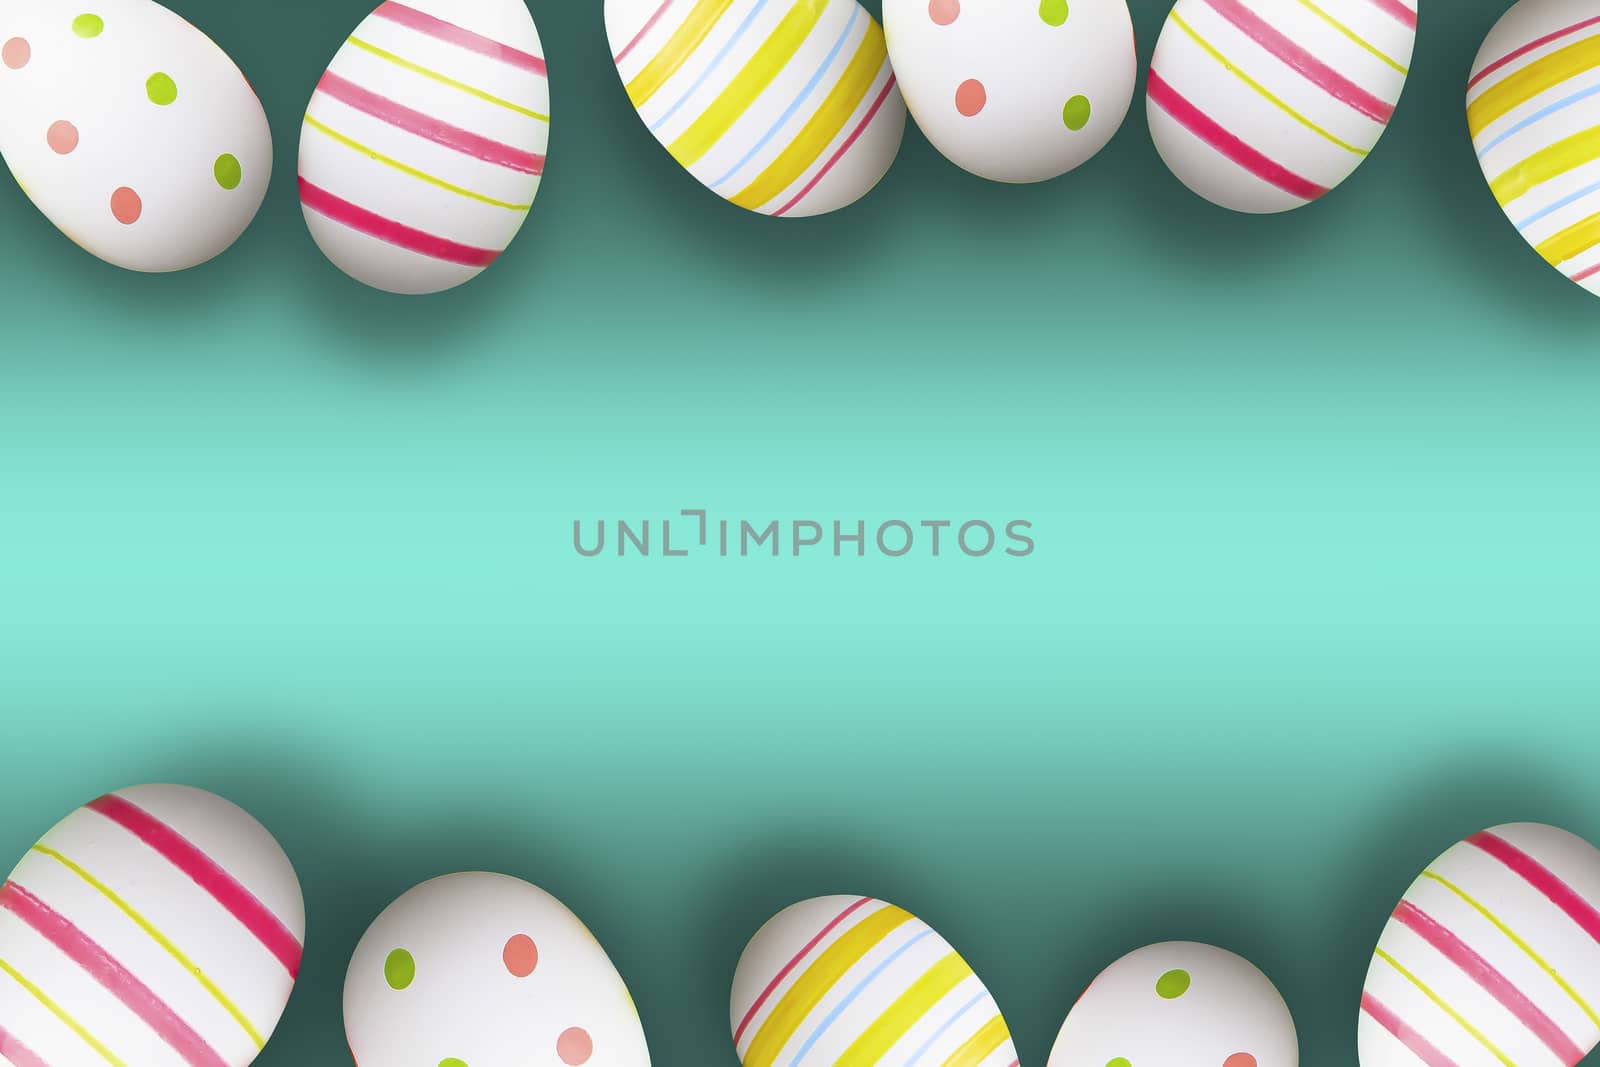 Colorful easter eggs on a green background with soft shadows by oasisamuel